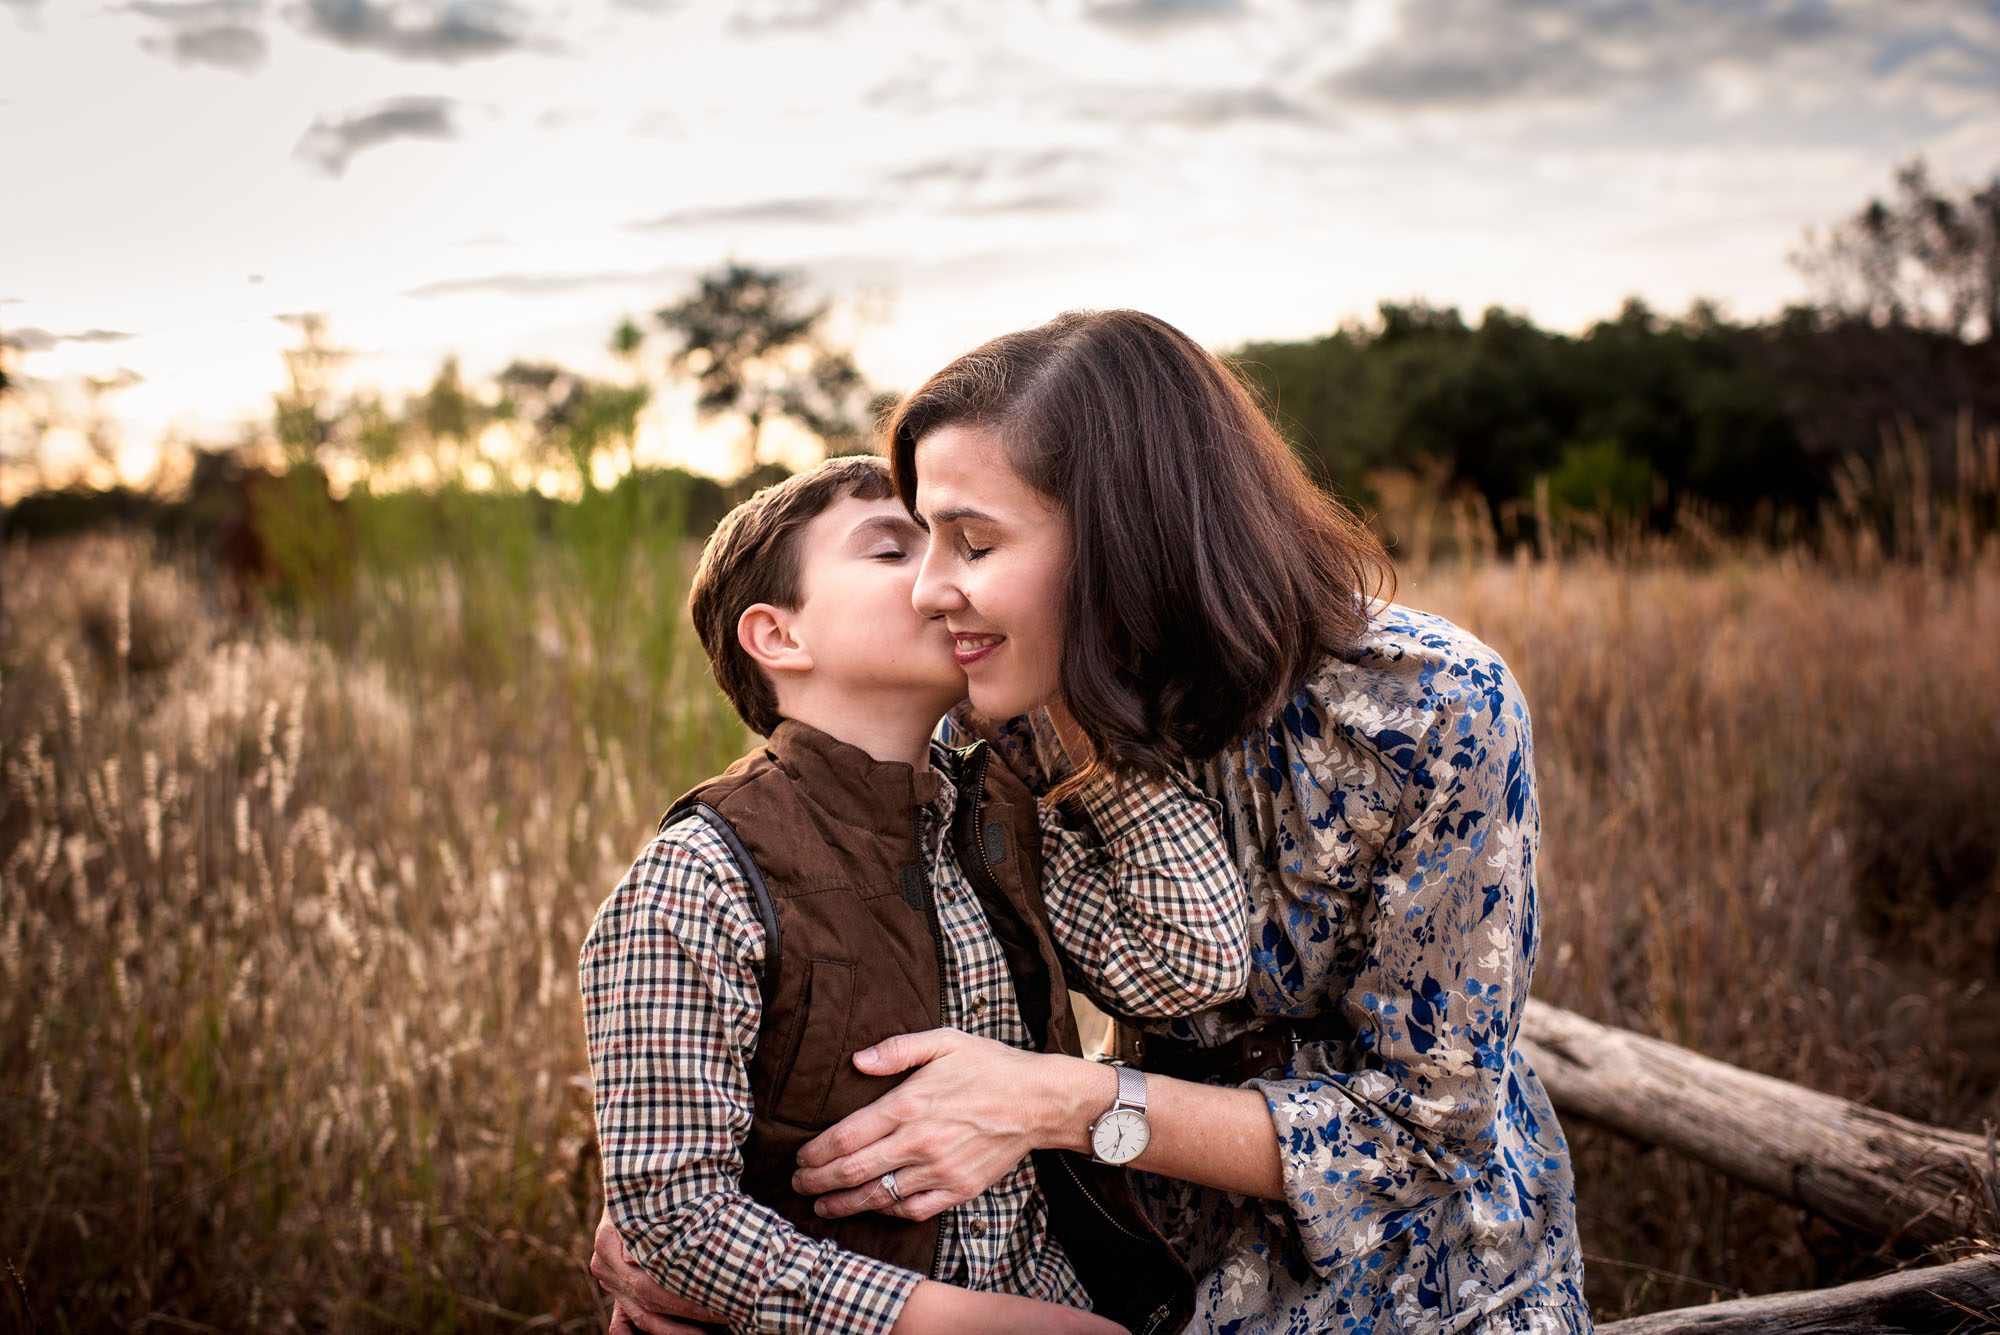 Son kissing Mom on the cheek in a grassy field, San Antonio Family Photographer